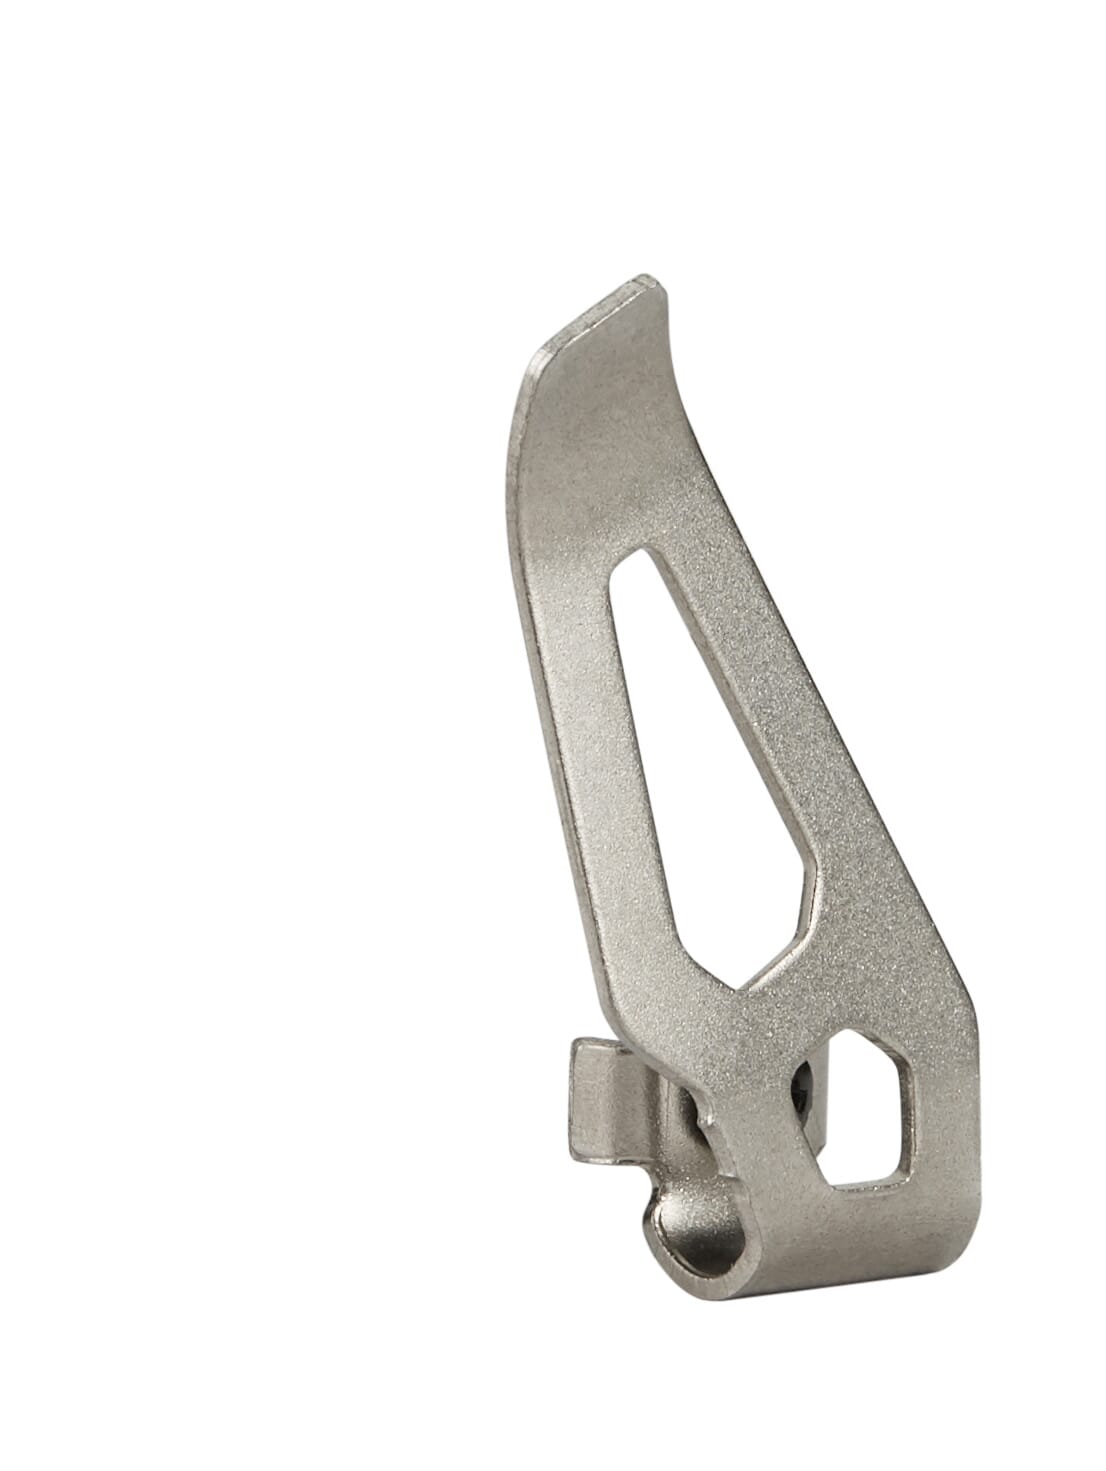 Milwaukee® 48-67-0010 Belt Clip, For Use With M12™ Cordless Drills, Impacts and Impact Wrenches